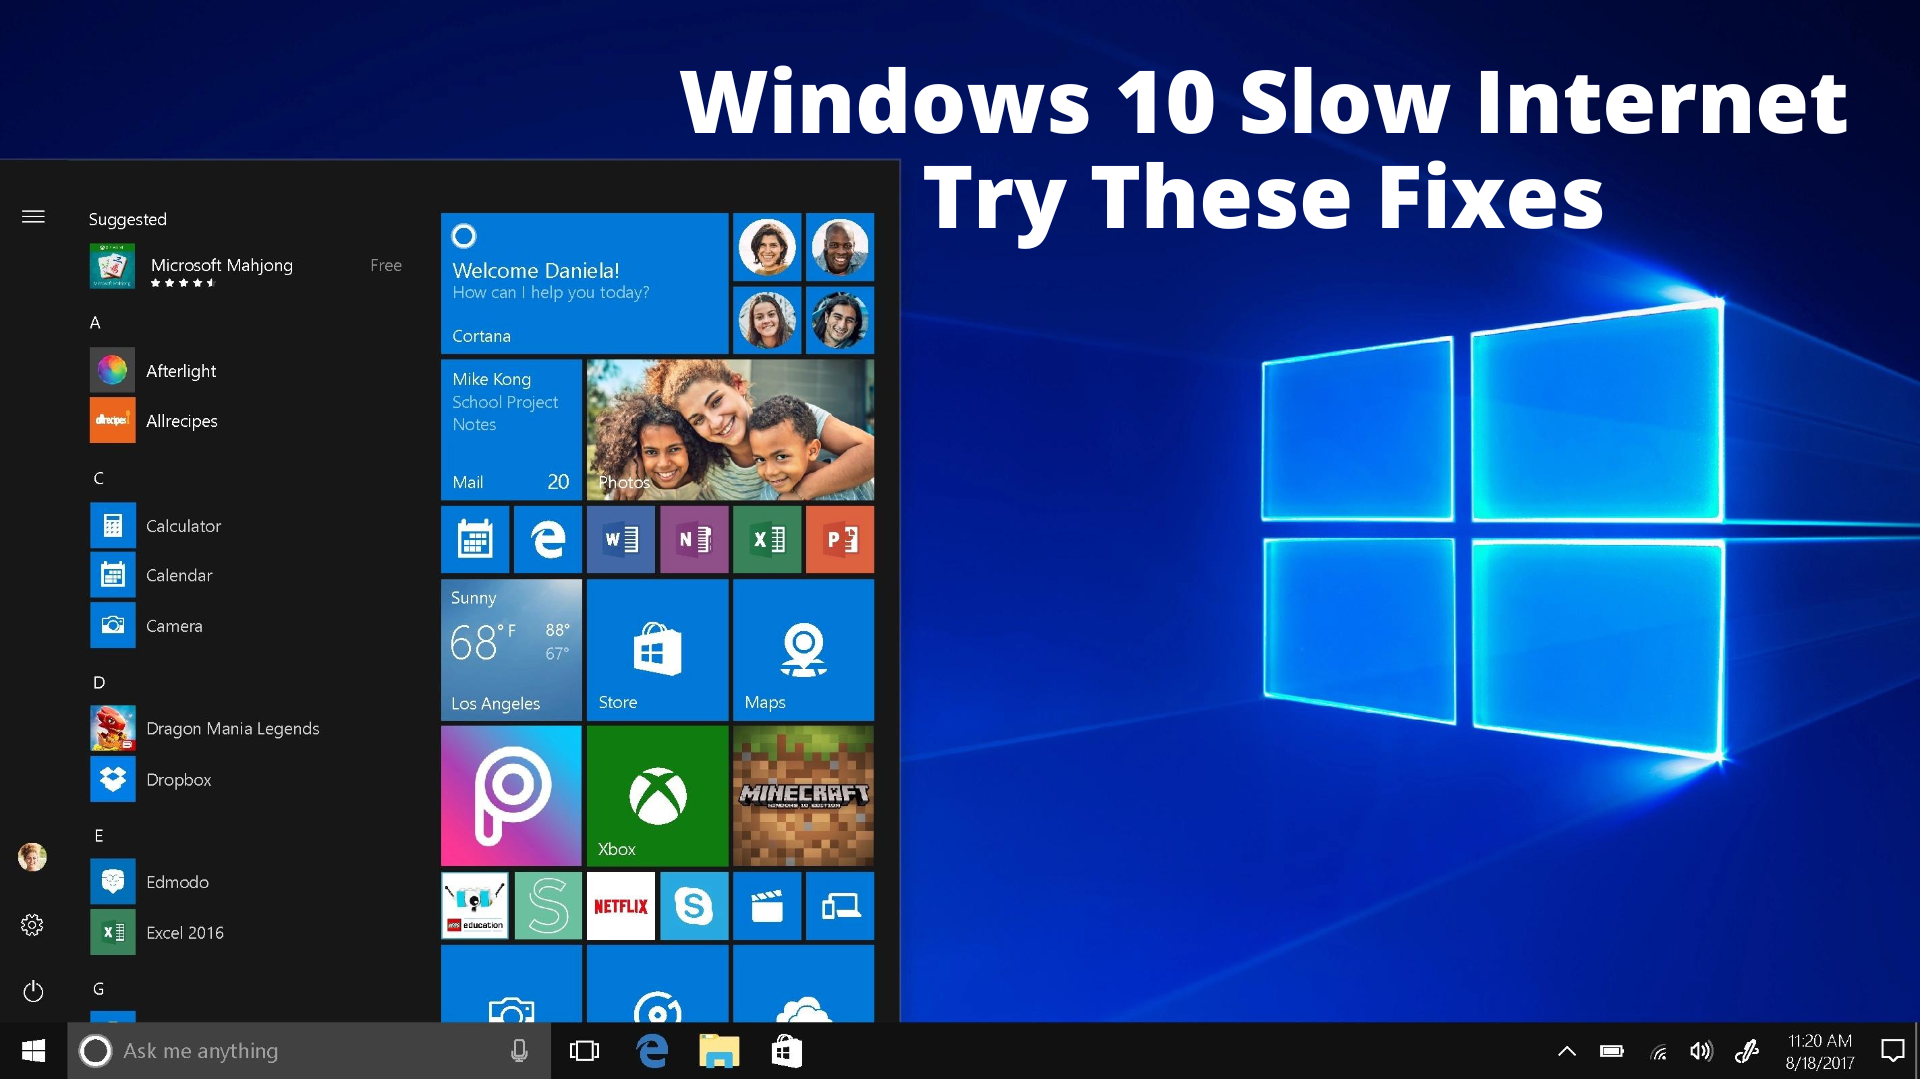 Windows 10 Slow Internet? Try These Fixes